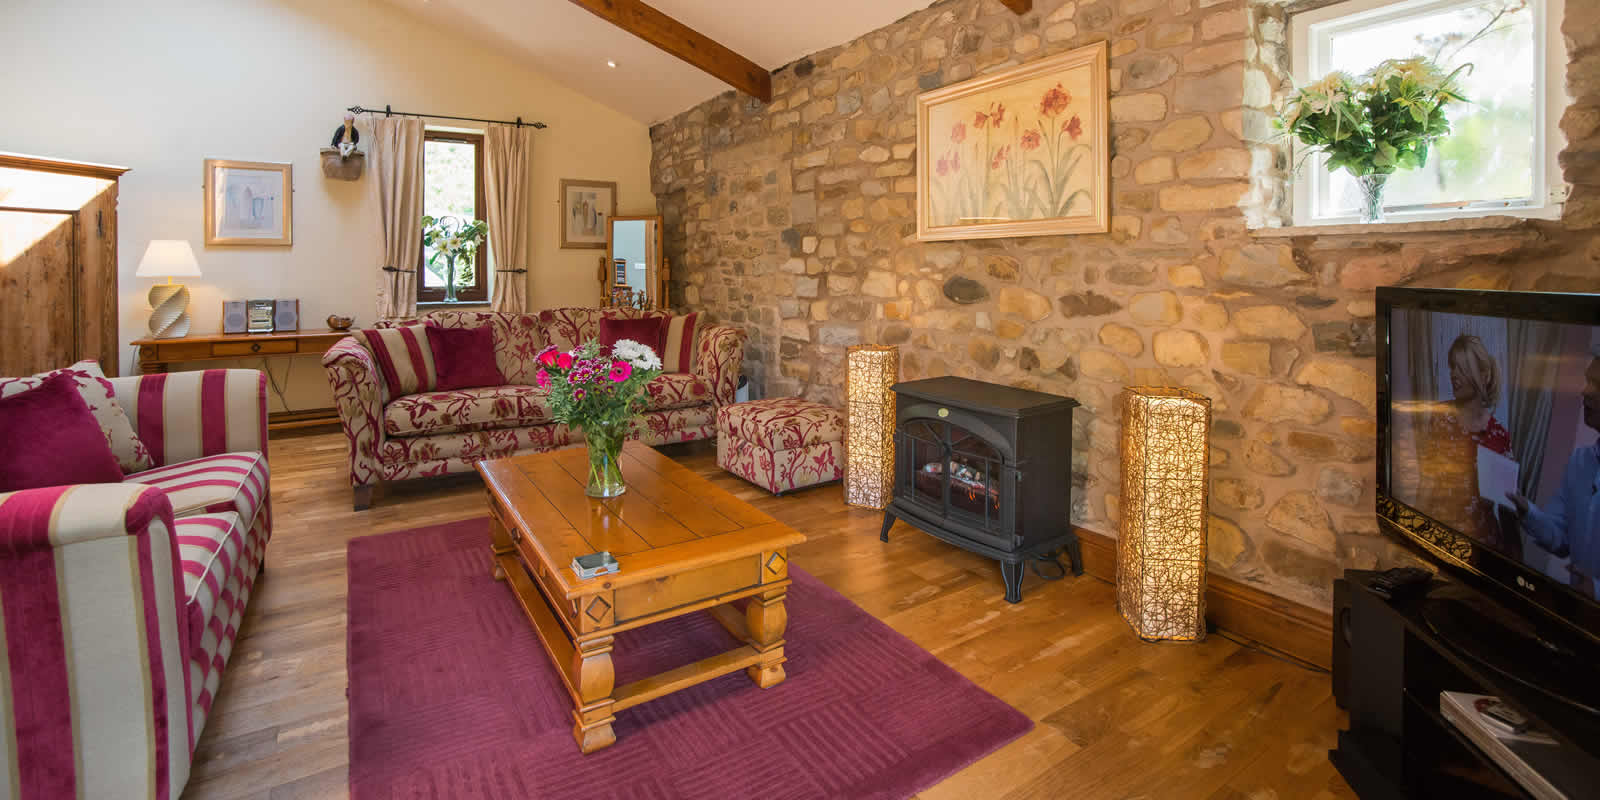 luxury holiday cottages in Lancshire